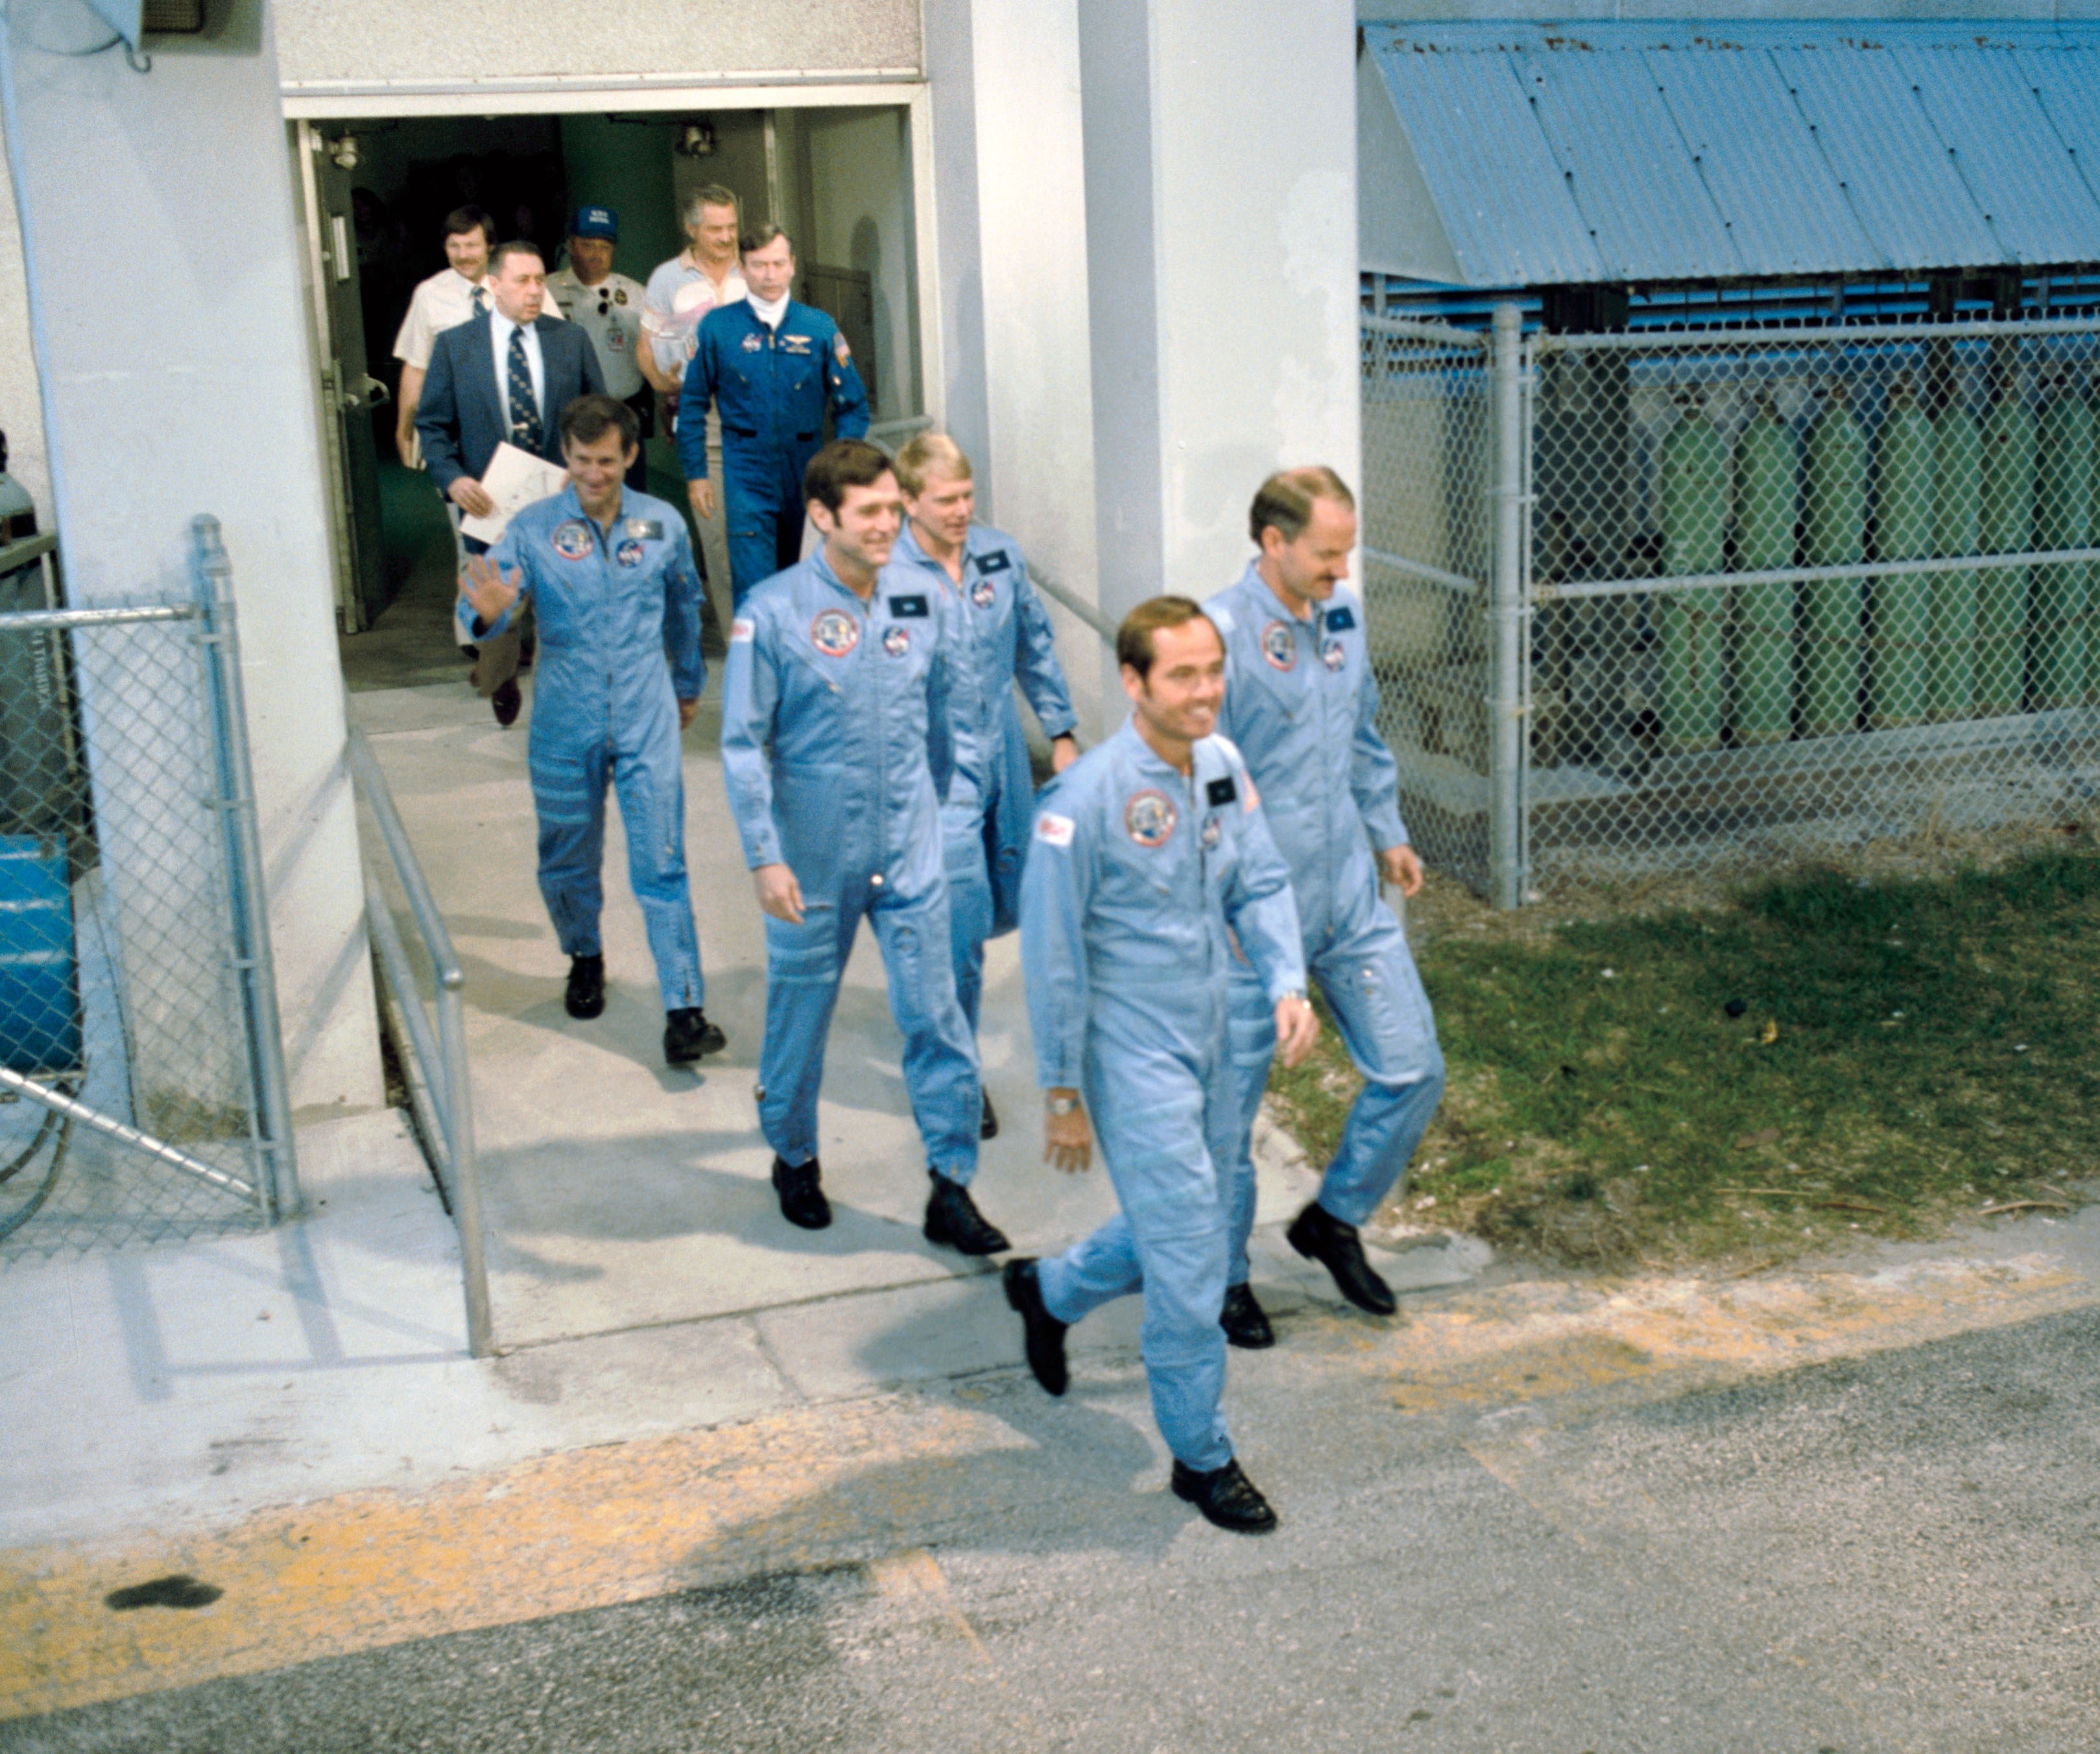 On launch day, the STS-41C astronauts walk out of crew quarters to board the Astrovan for the ride to Launch Pad 39A